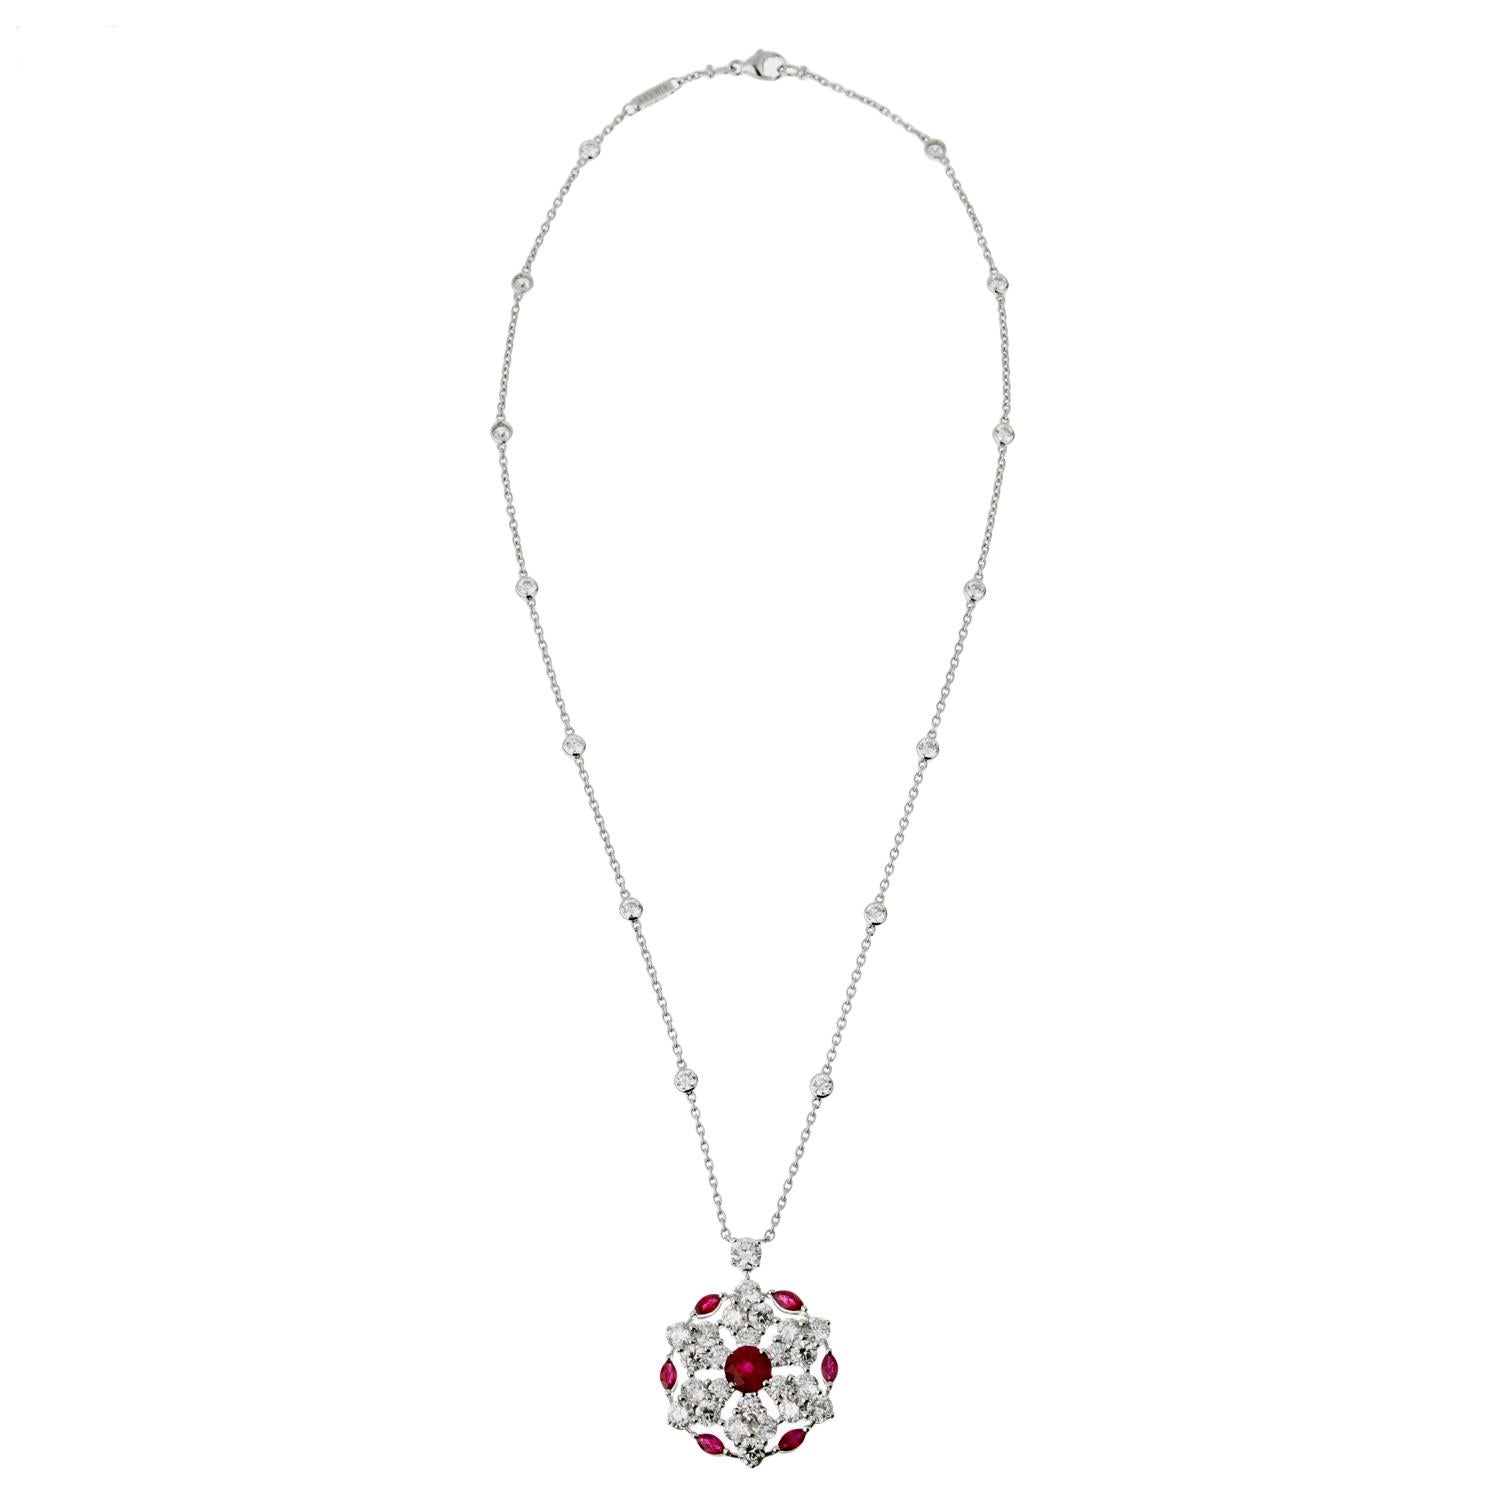 A fabulous Graff Ruby and Diamond necklace showcasing a pendant set with brilliant-cut diamonds, marquise-cut rubies and a central circular-cut ruby, on a cable link chain adorned with round brilliant cut diamond stations. The necklace is mounted in